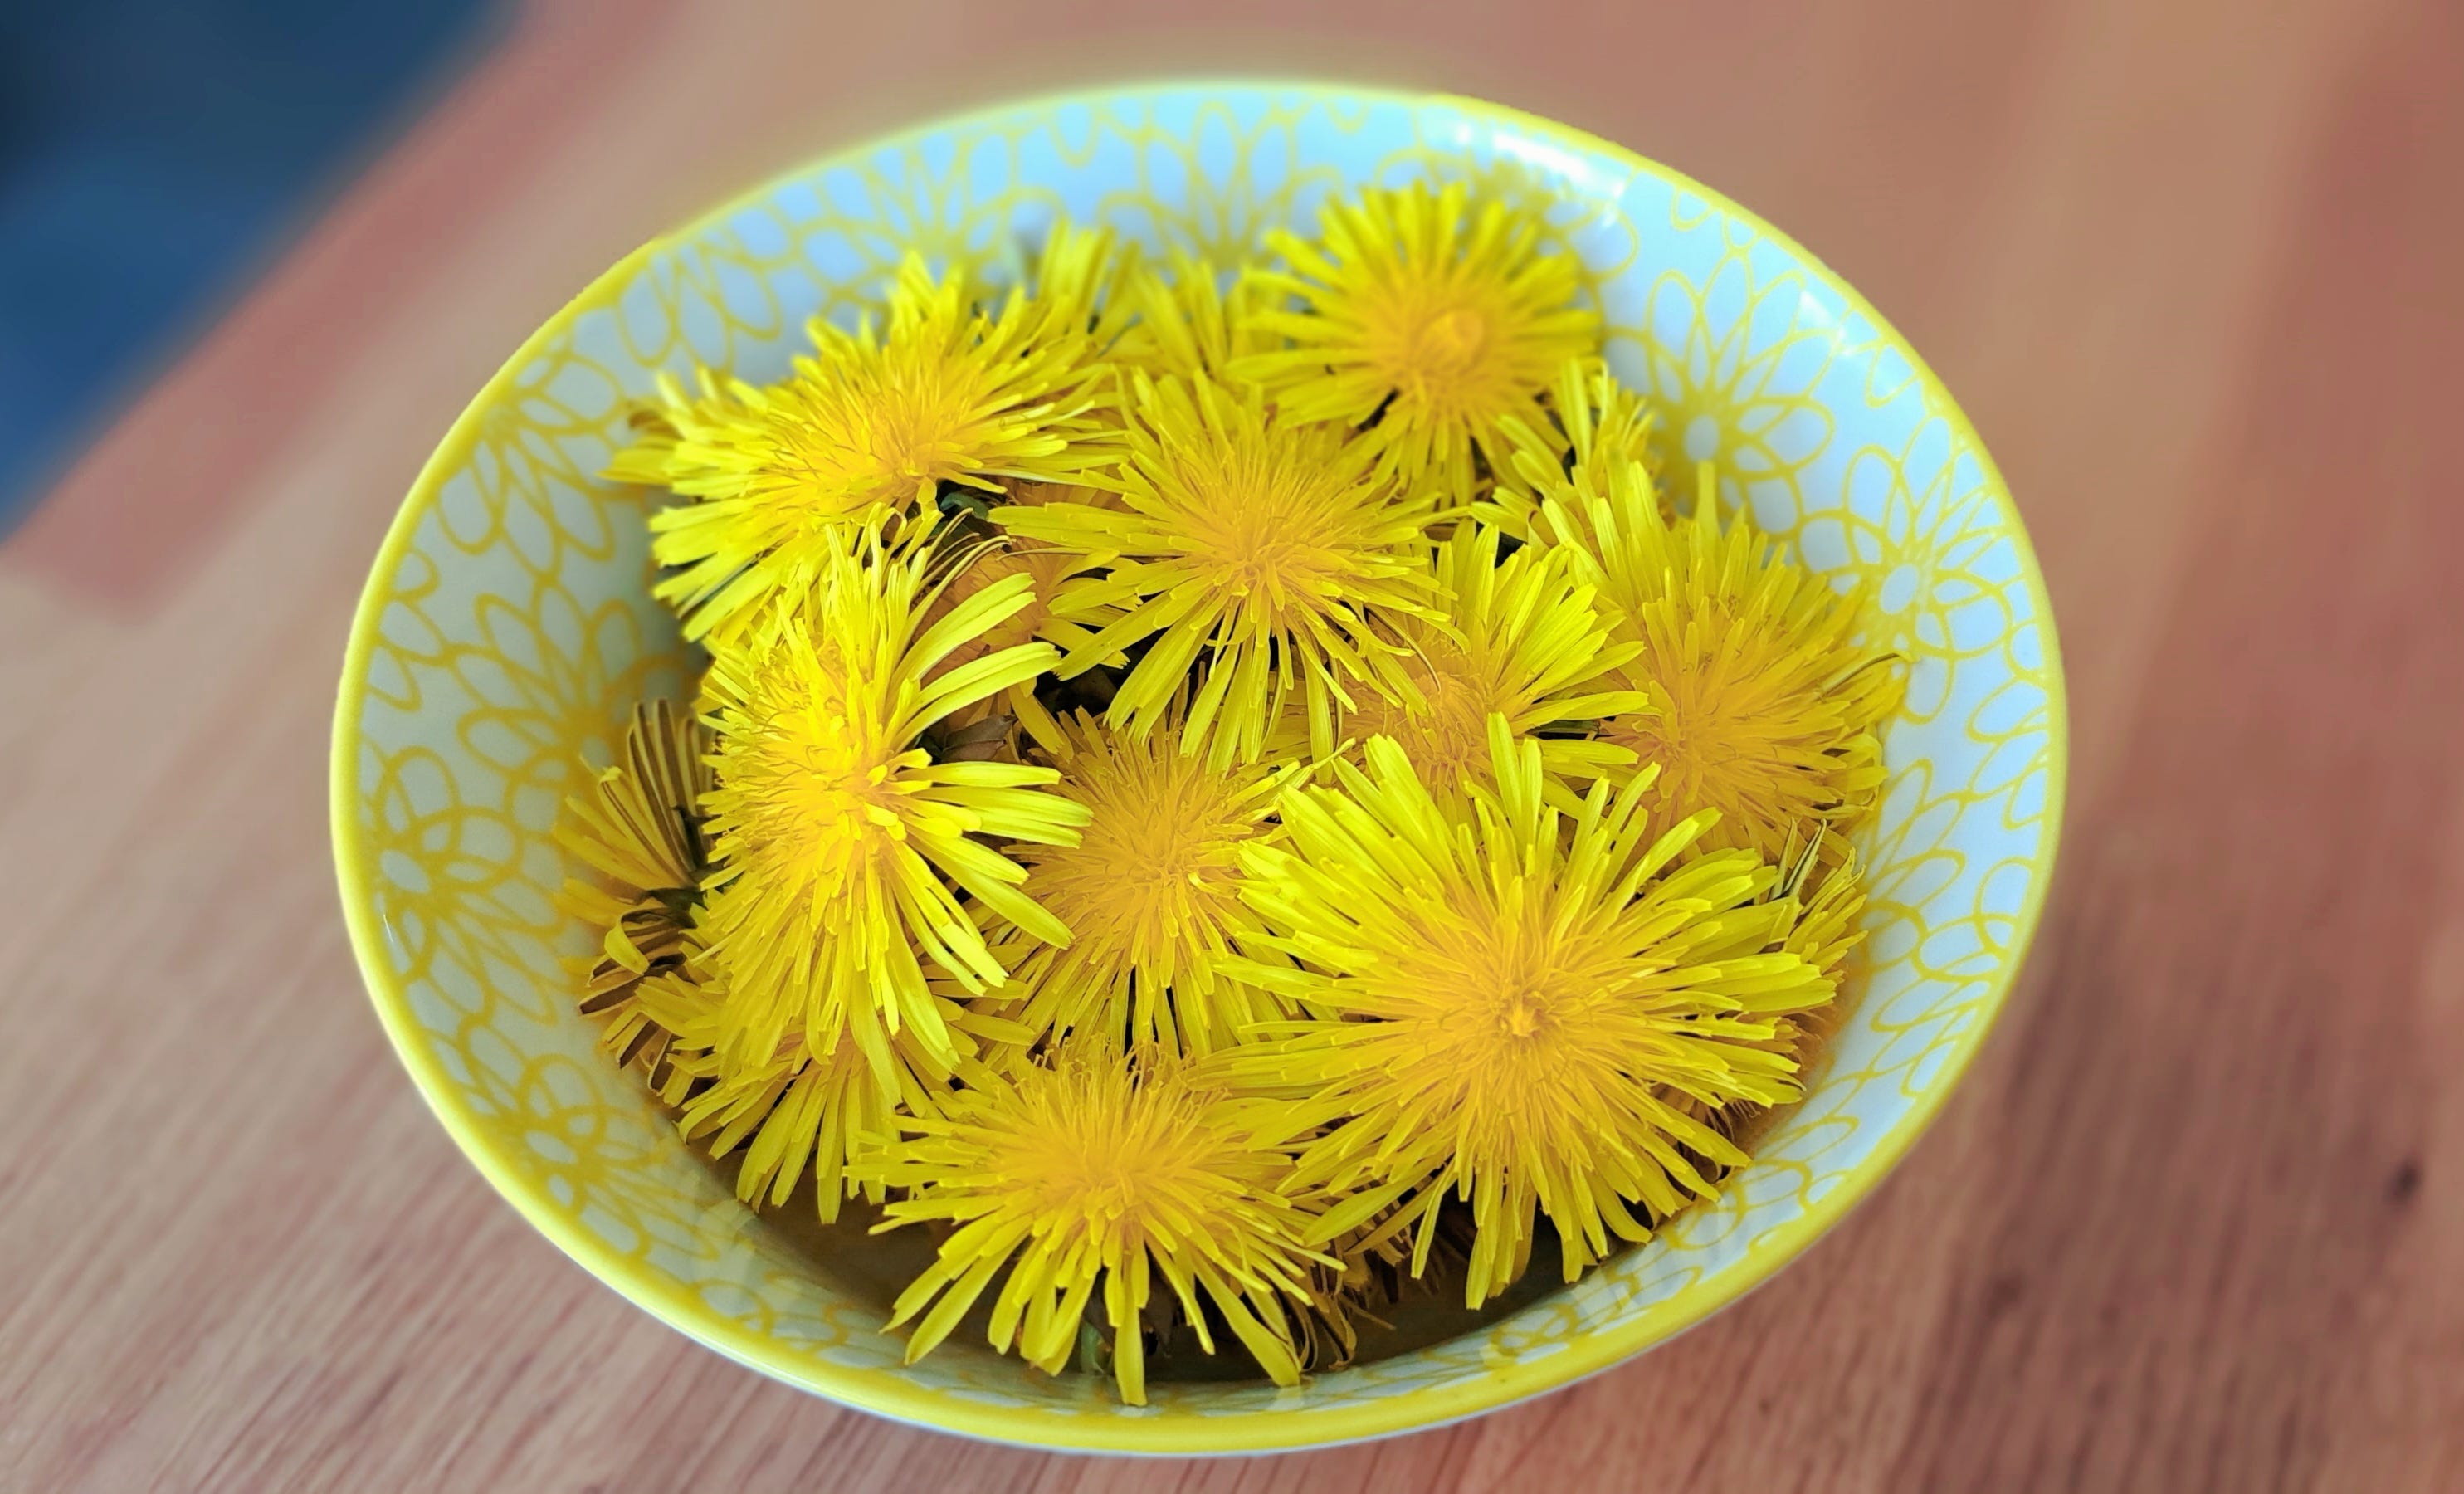 A white and yellow patterned bowl filled with dandelion flowers